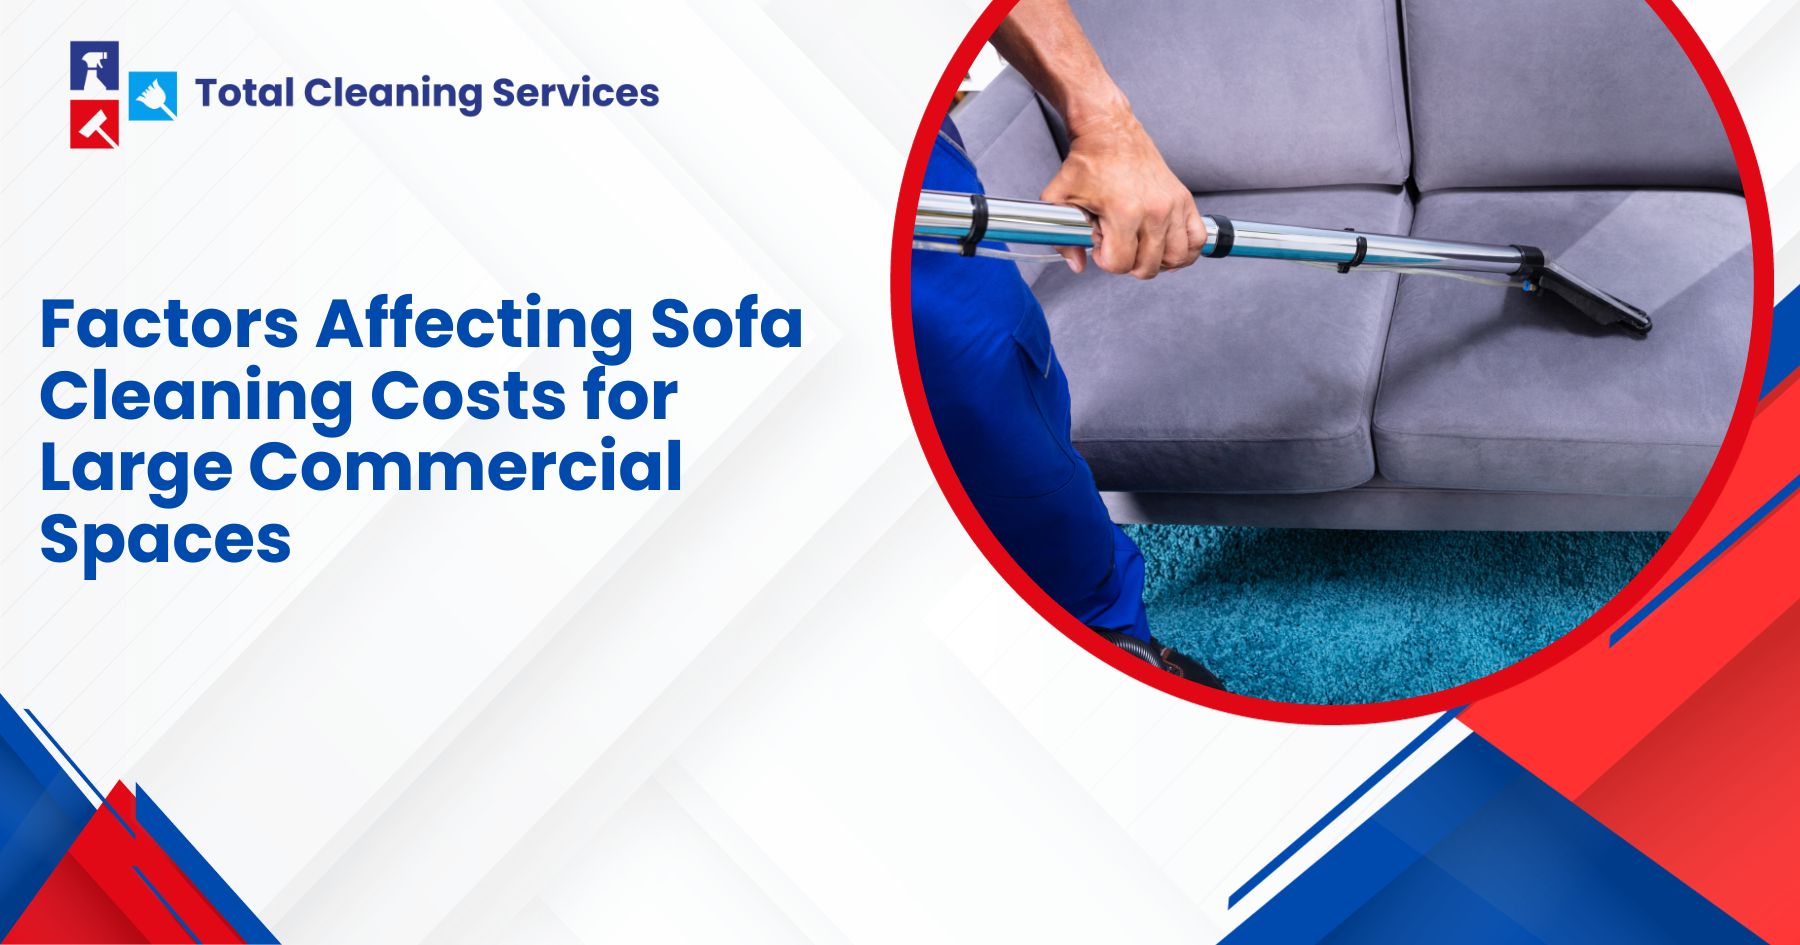 Factors Affecting Sofa Cleaning Costs for Large Commercial Spaces